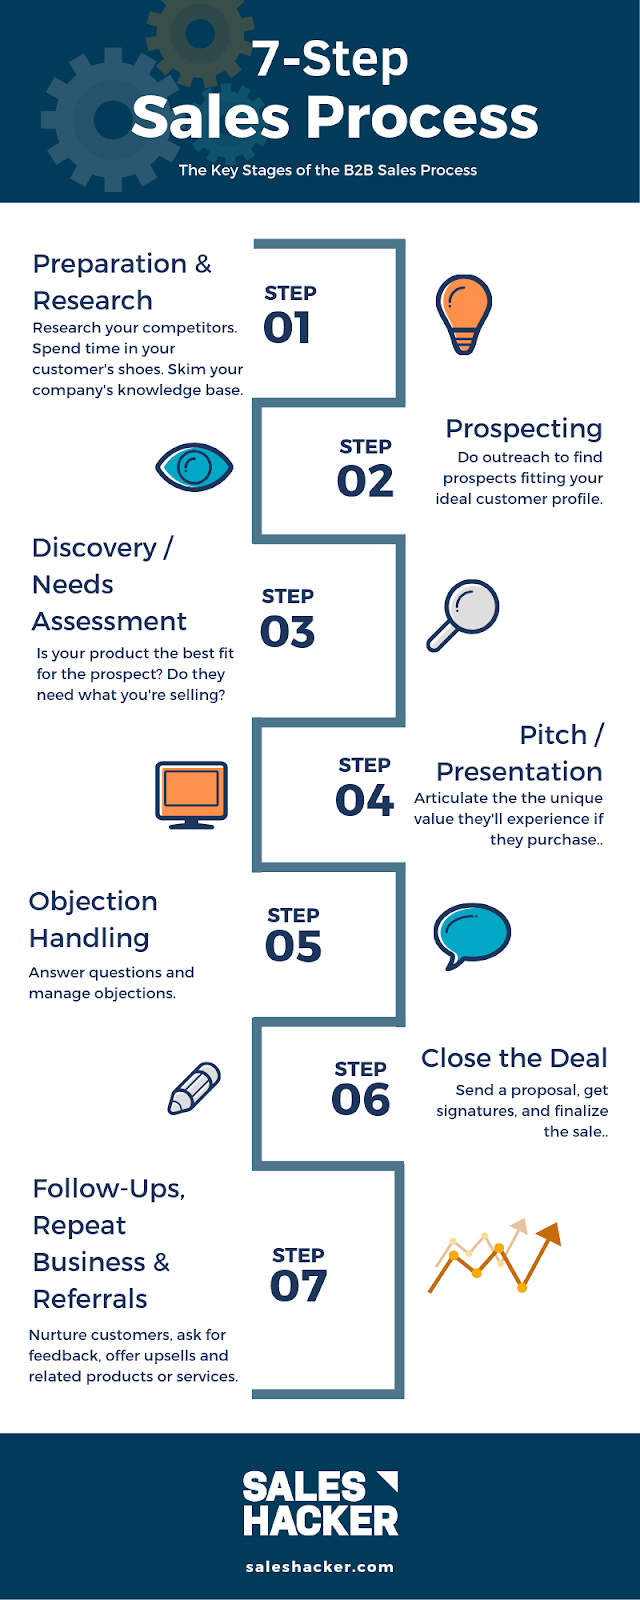 convert leads into meetings - 7-step sales process infographic